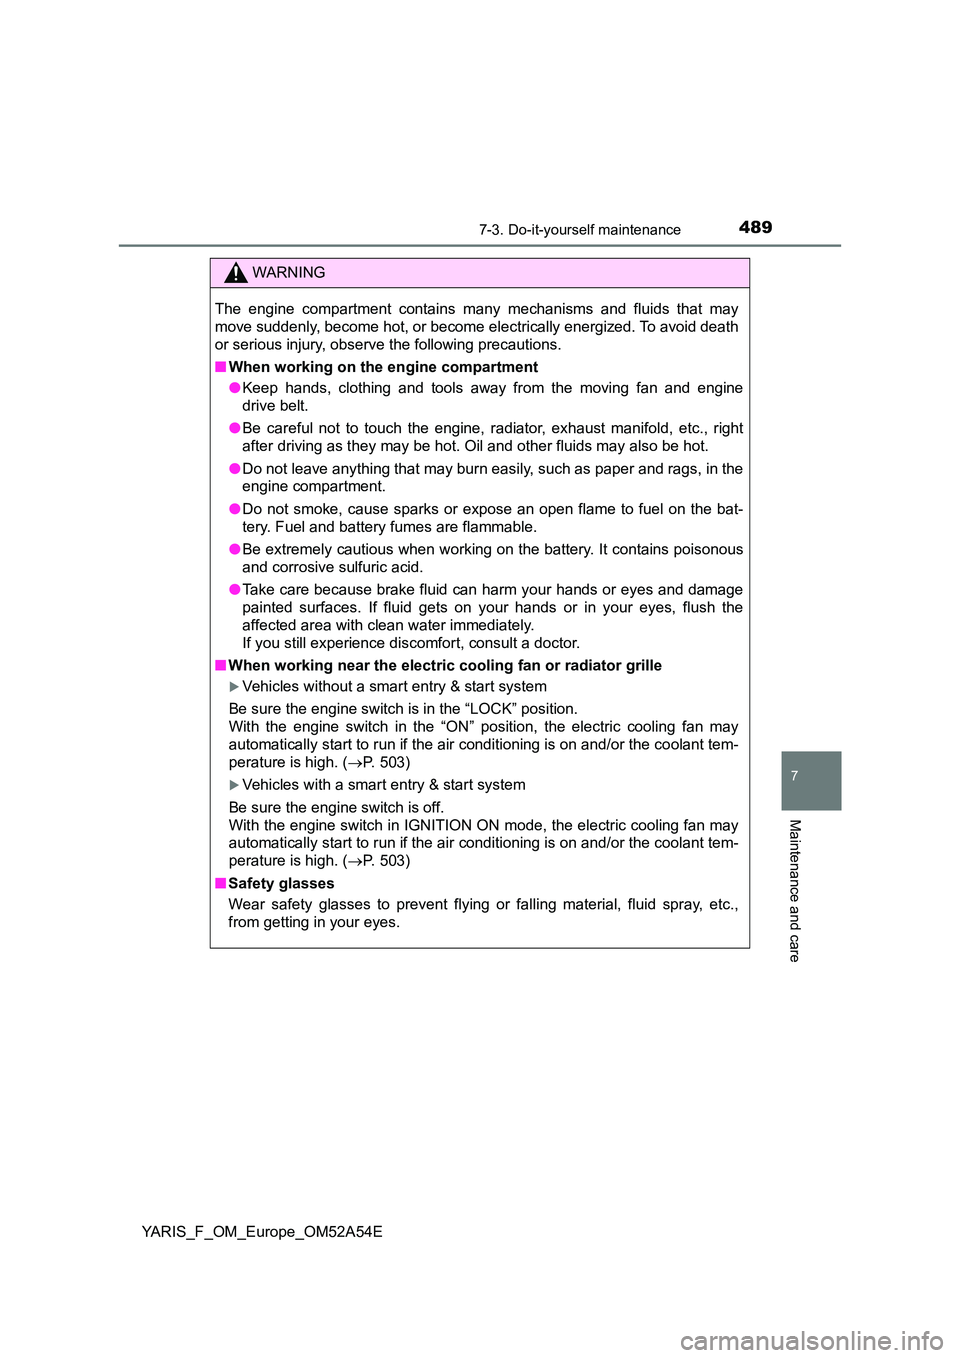 TOYOTA YARIS 2020  Owners Manual 4897-3. Do-it-yourself maintenance
7
Maintenance and care
YARIS_F_OM_Europe_OM52A54E
.
WARNING
The engine compartment contains many mechanisms and fluids that may 
move suddenly, become hot, or become